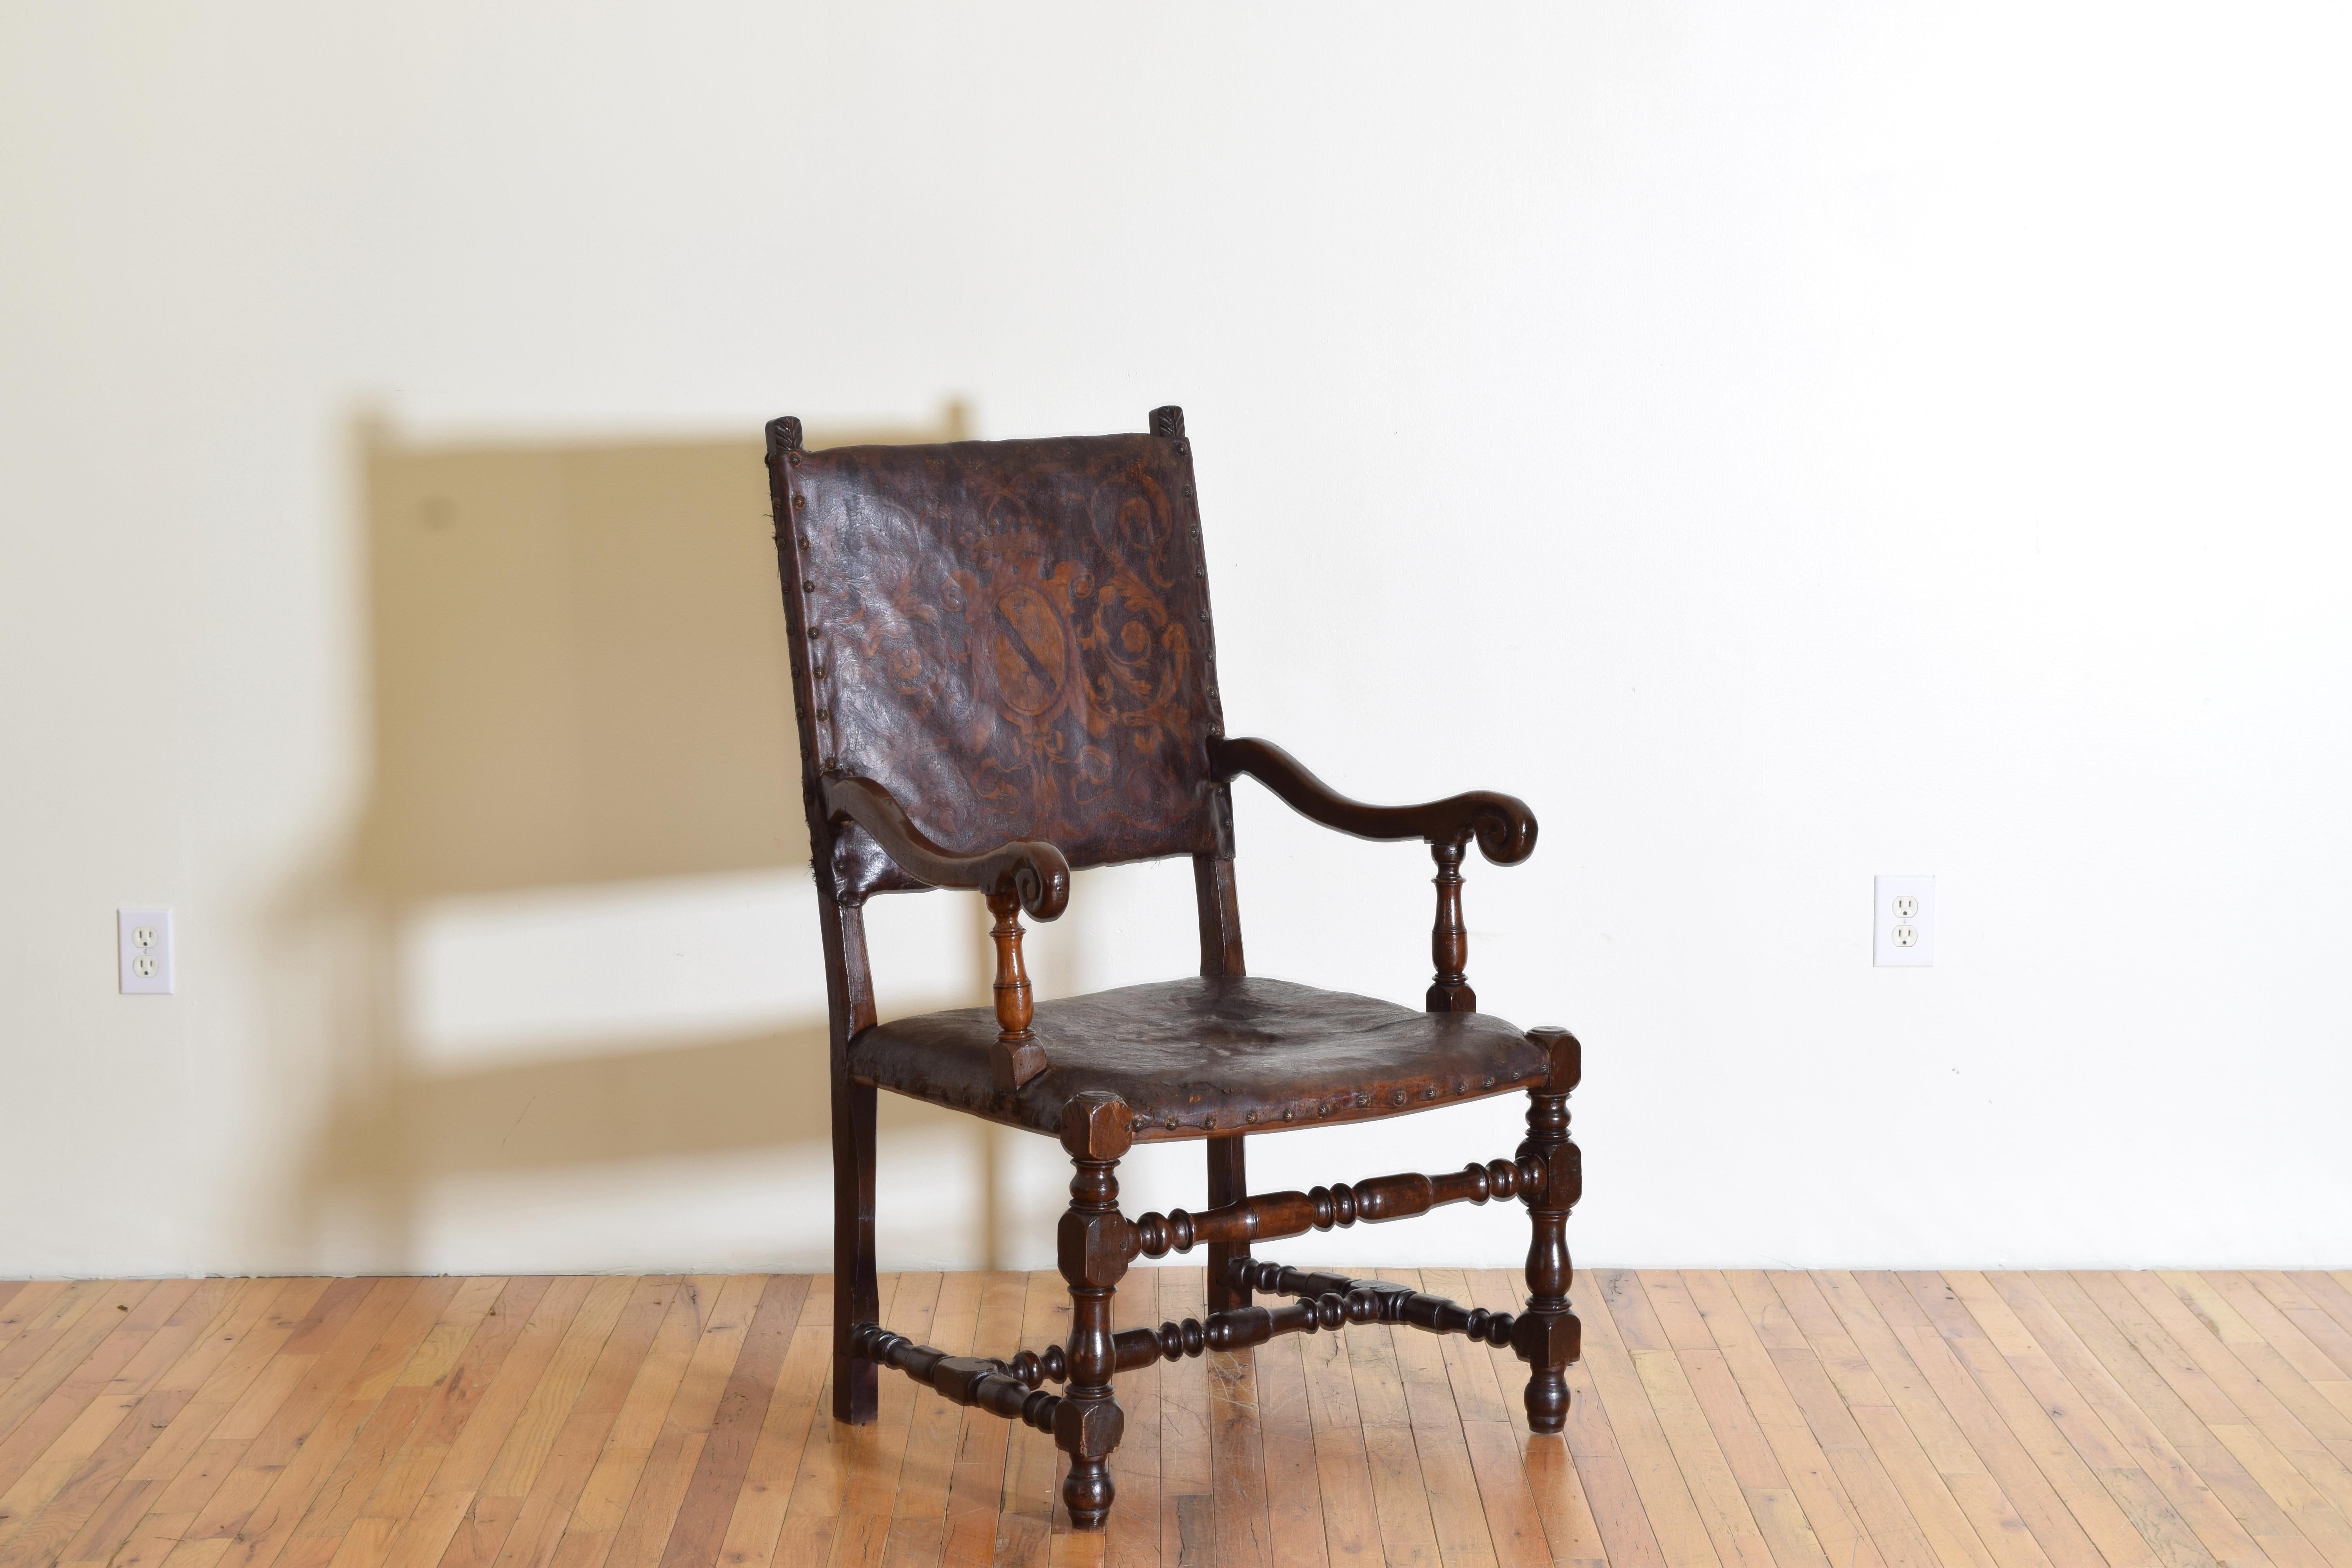 having a rectangular backrest with small carved finials and a fitted seat, the arms recessed, turne arm supports, legs, and stretchers, raised on turned feet, the upholstery is a tooled and polychrome painted leather with a stemma pf the Calleri